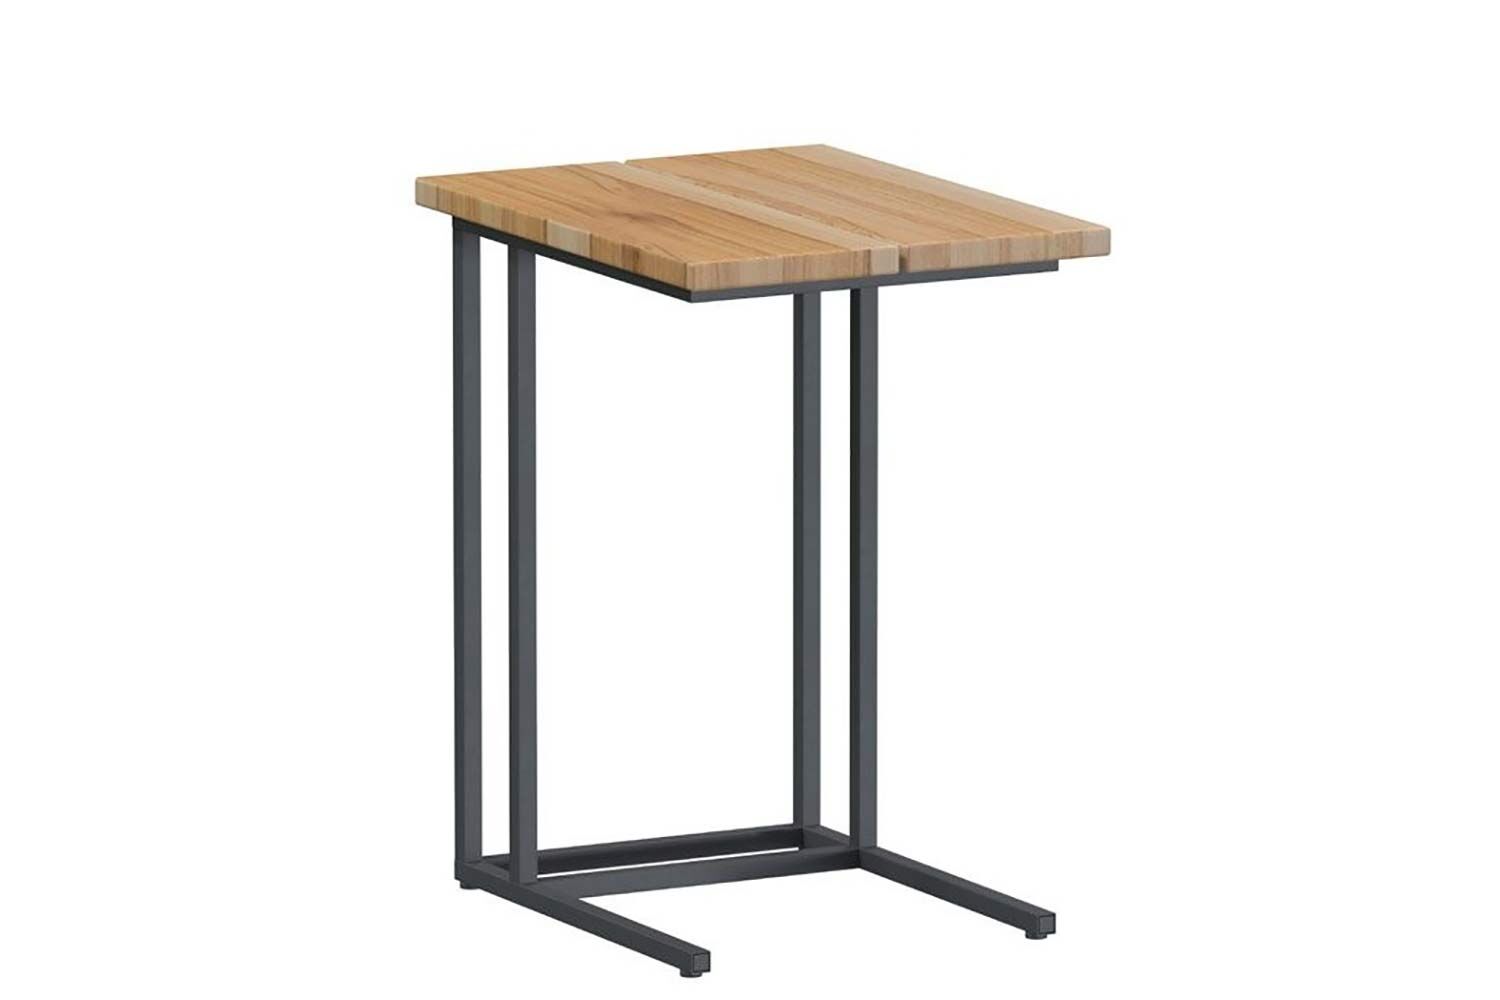 4 Season Outdoor Solido support table 42 x 35 x 50 cm